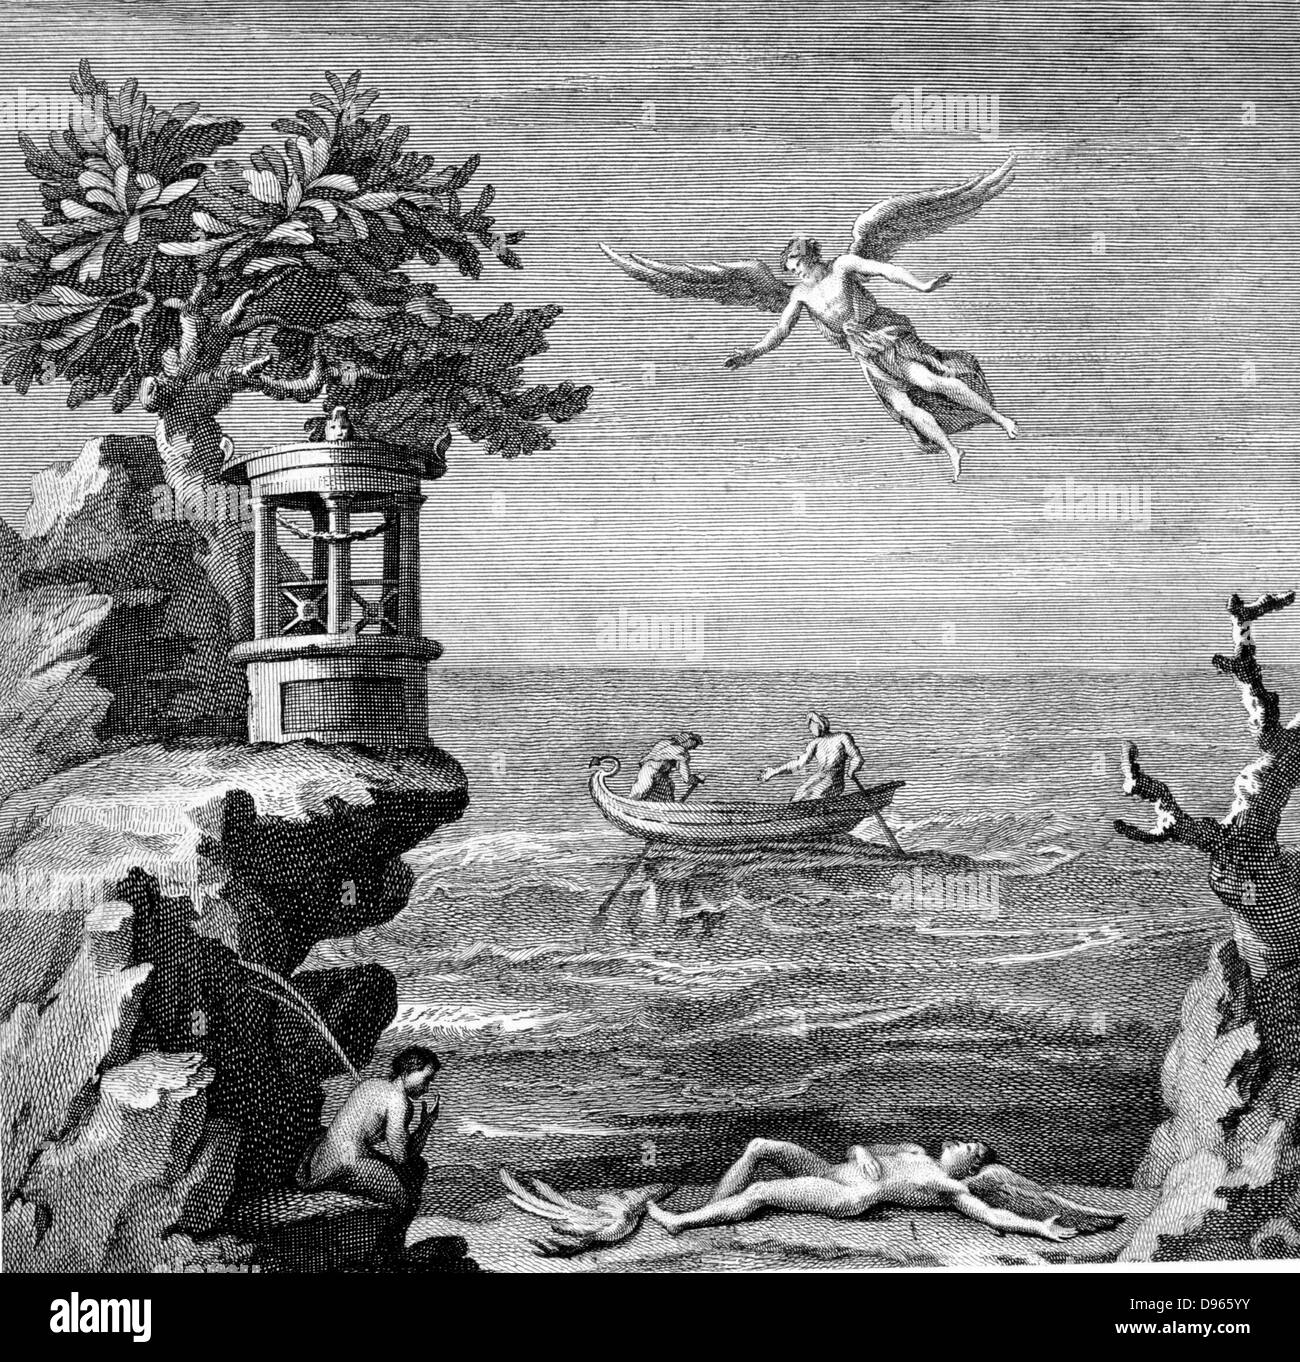 Death of Icaros. According to legend, in order to escape from Crete, Daedalus made wings of wax and feathers for himself and his son, but Icaros flew too near the Sun and his wings melted and he fell to his death 18th century engraving after wall painting Stock Photo